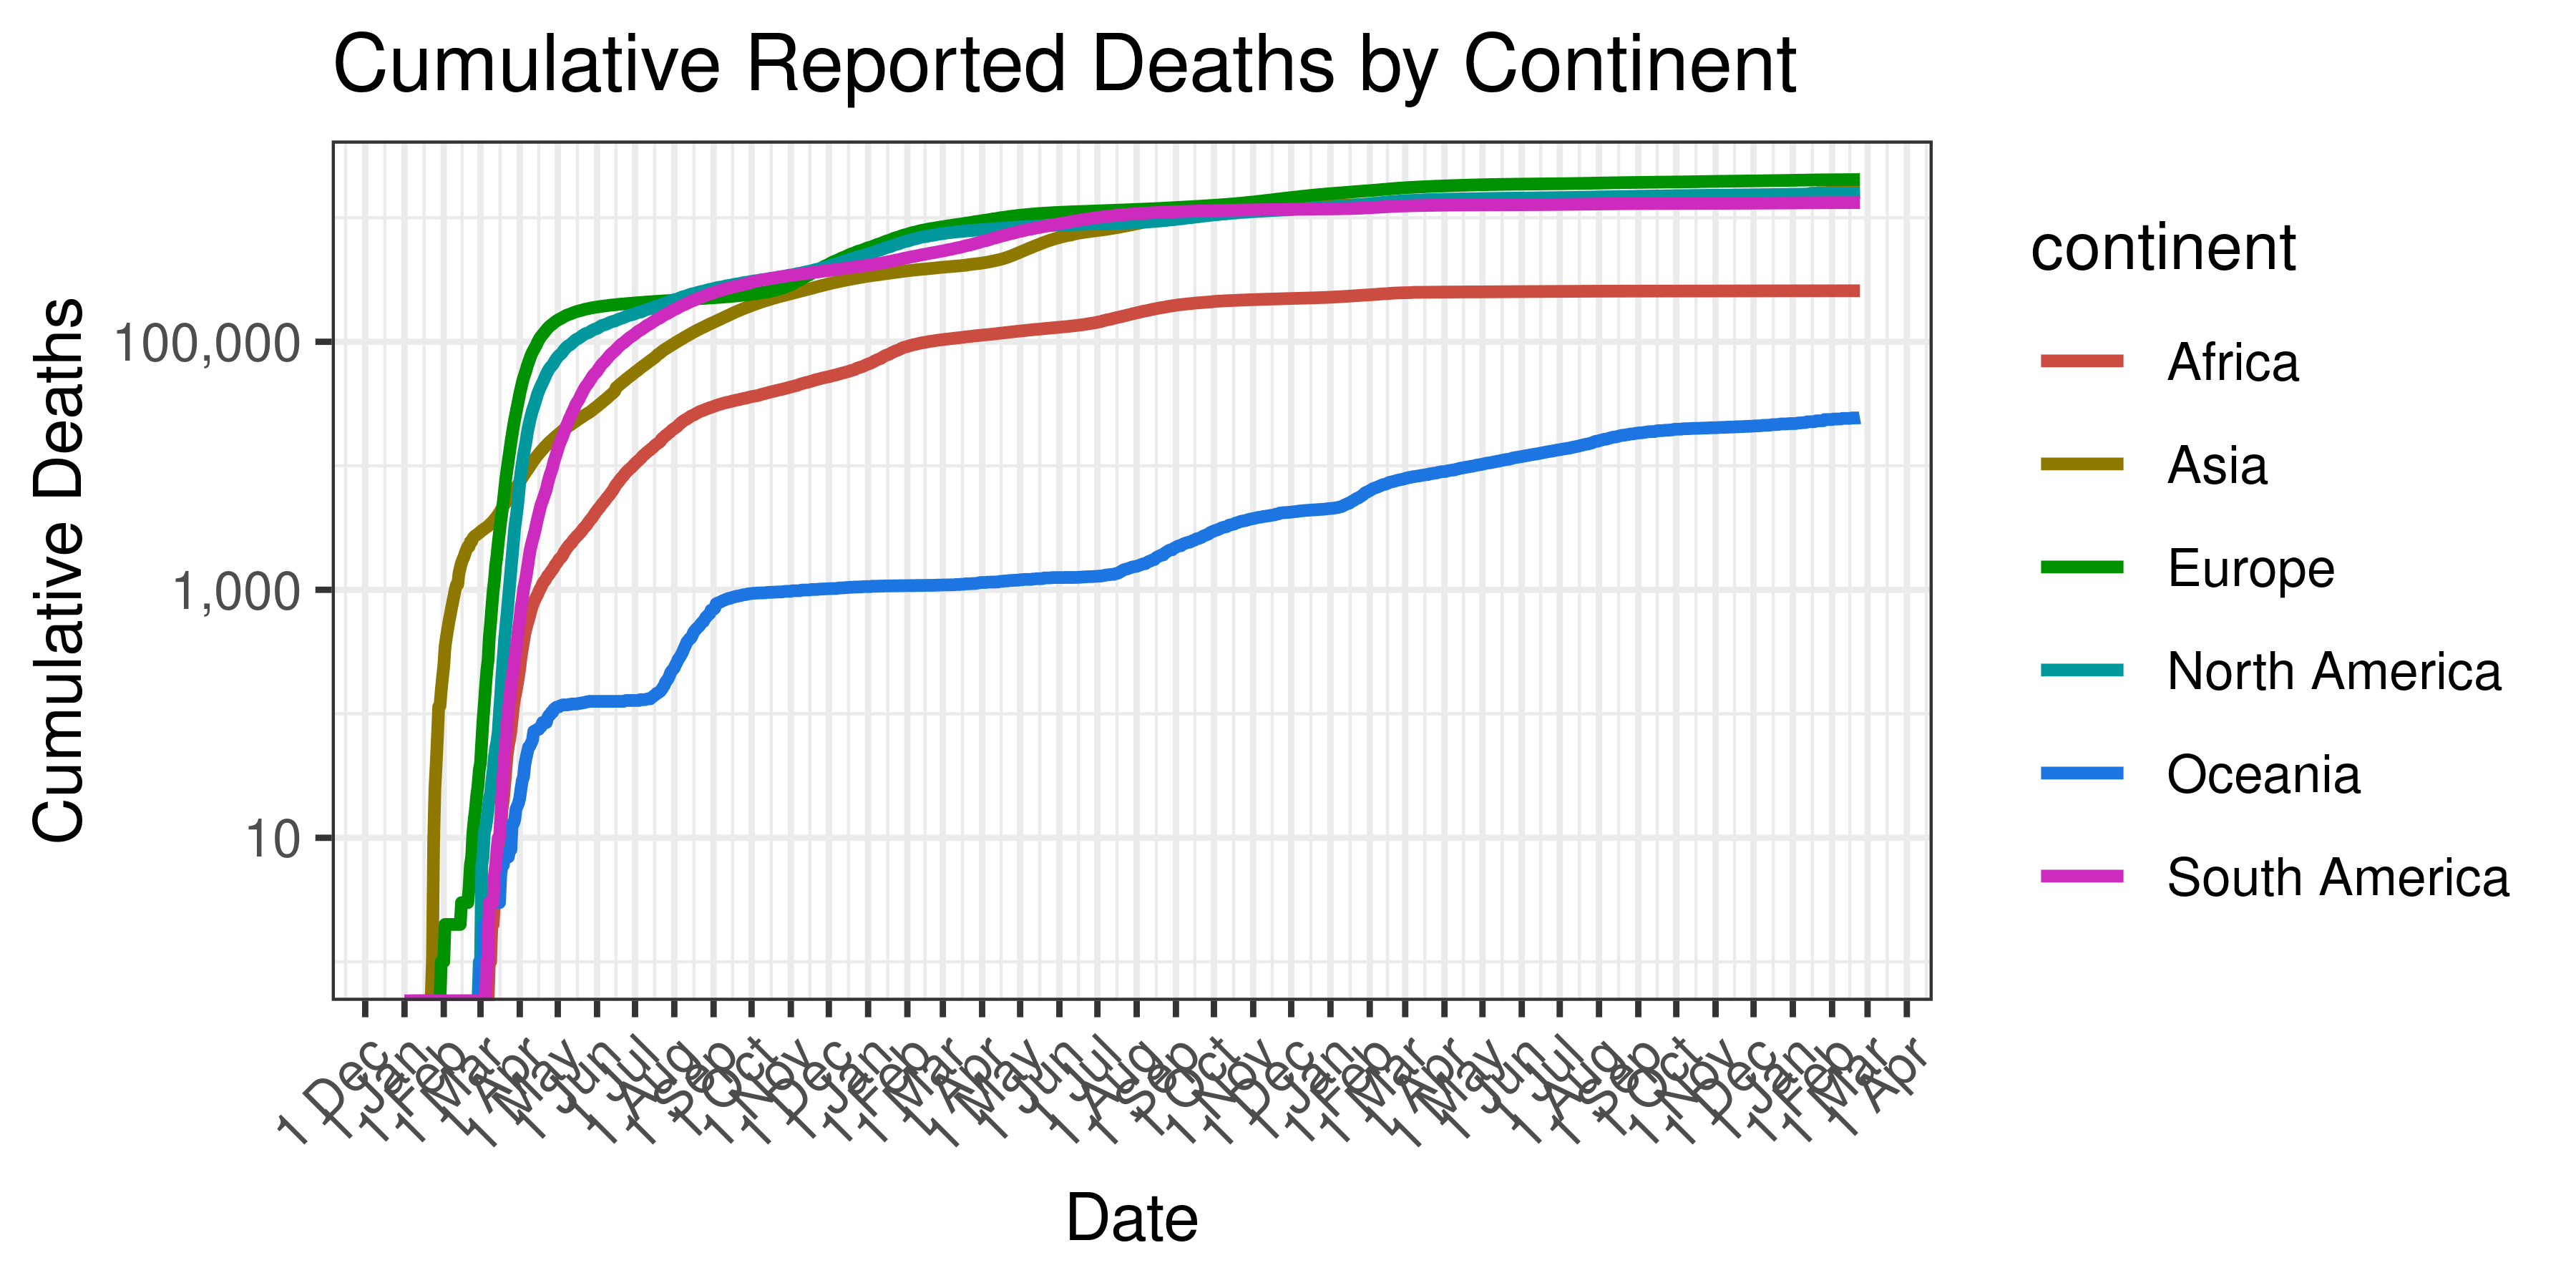 Cumulative Reported Deaths by Continent